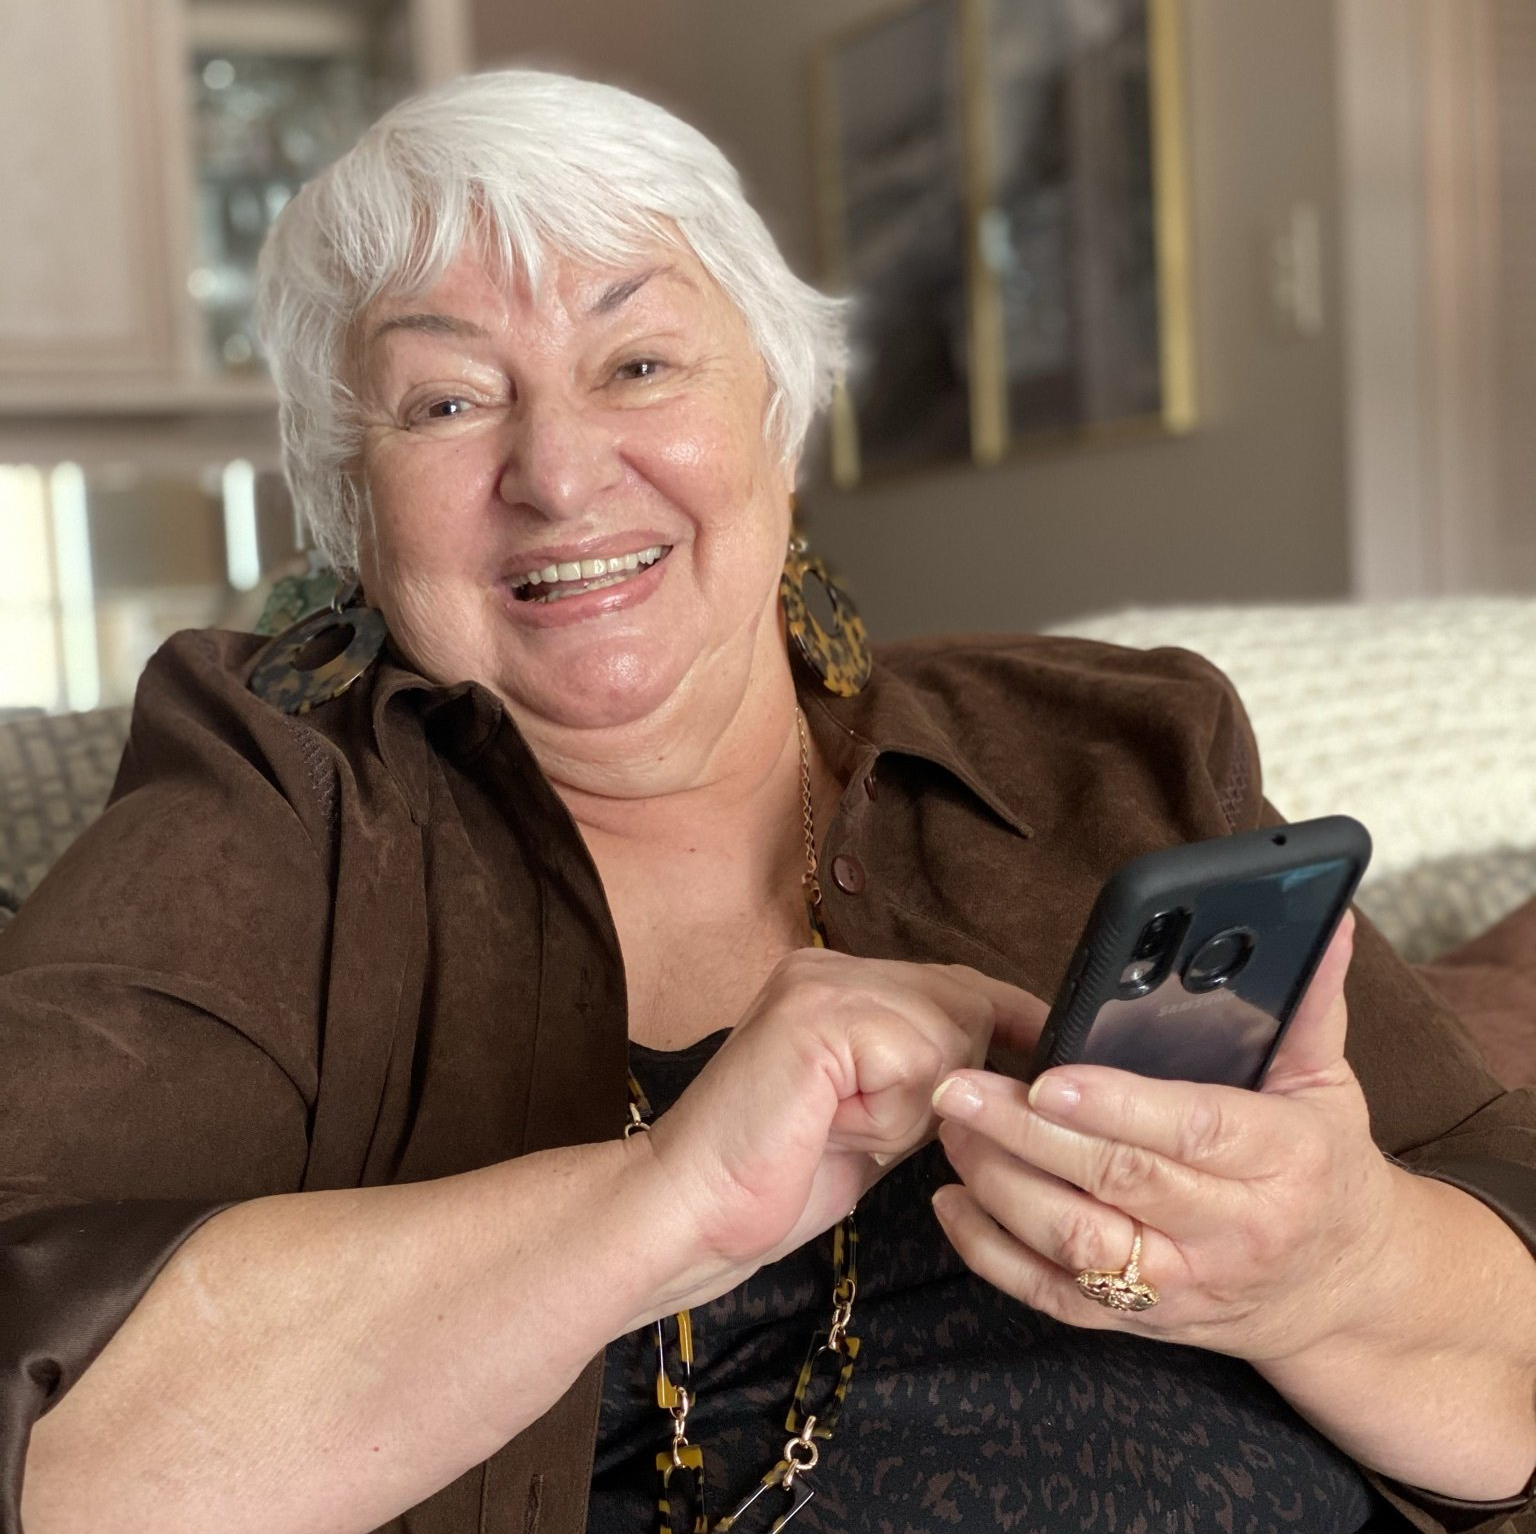 retired lady scrolling through her phone on the couch in her independent living apartment